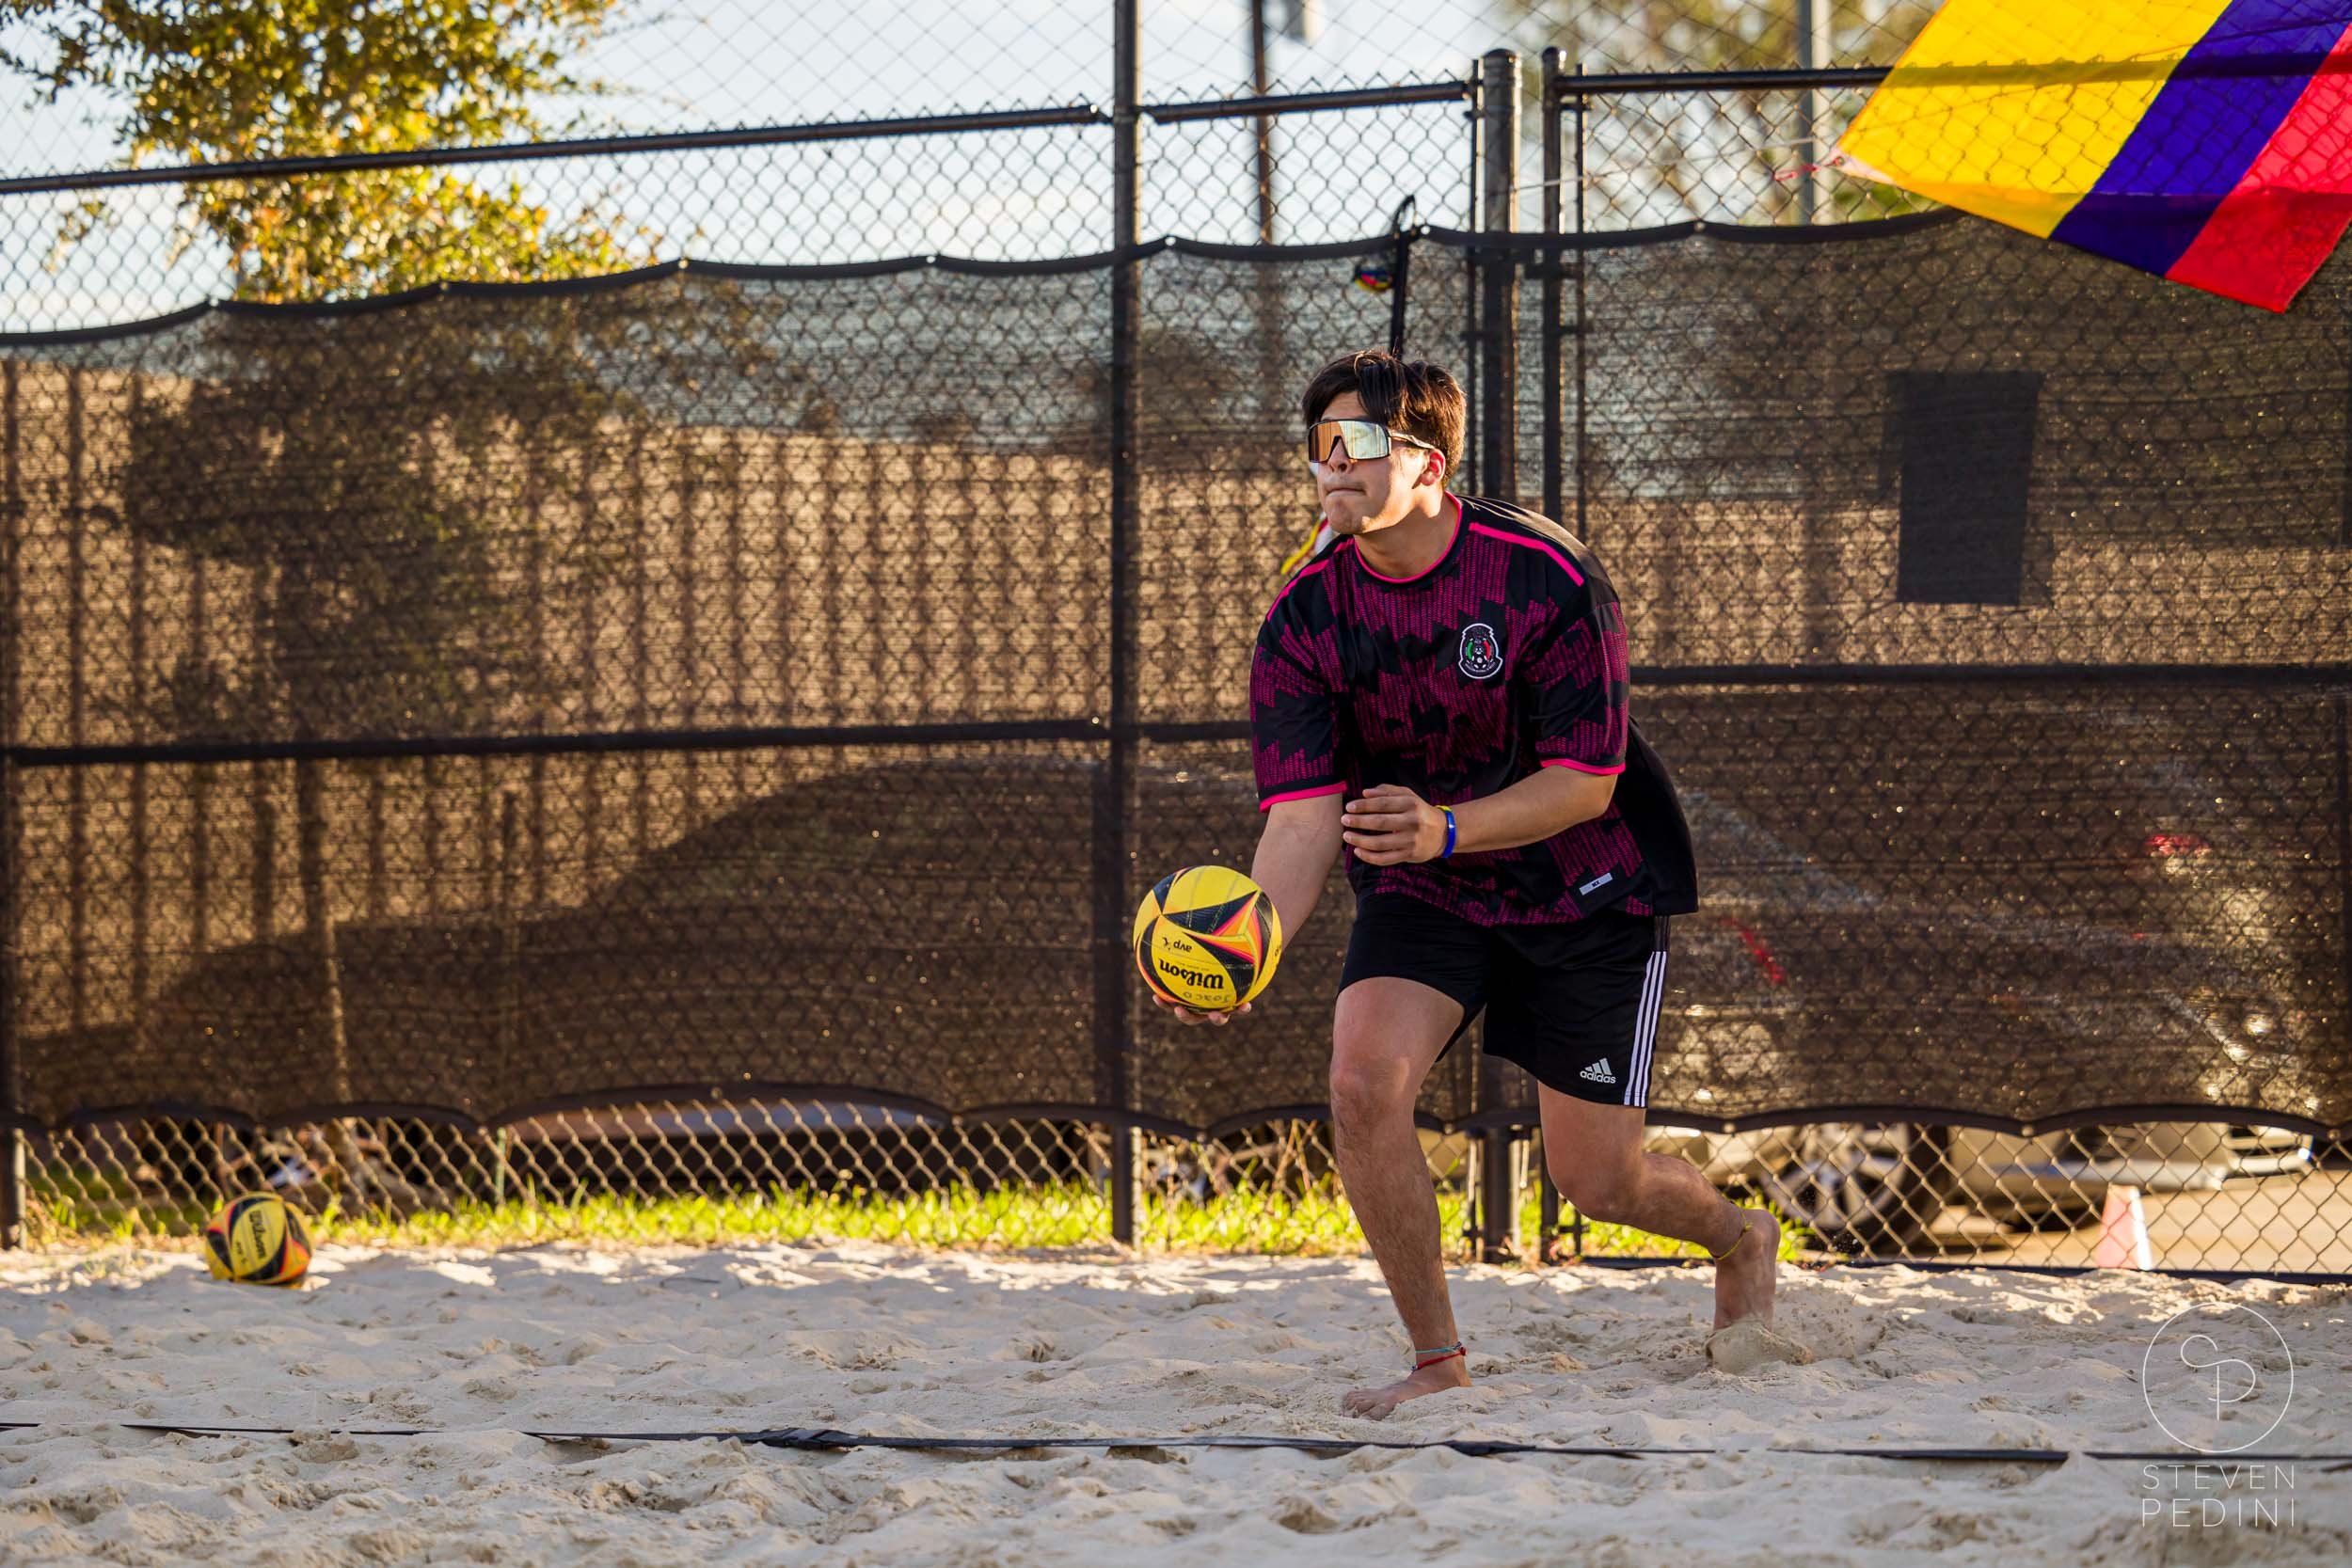 Steven Pedini Photography - Bumpy Pickle - Sand Volleyball - Houston TX - World Cup of Volleyball - 00128.jpg